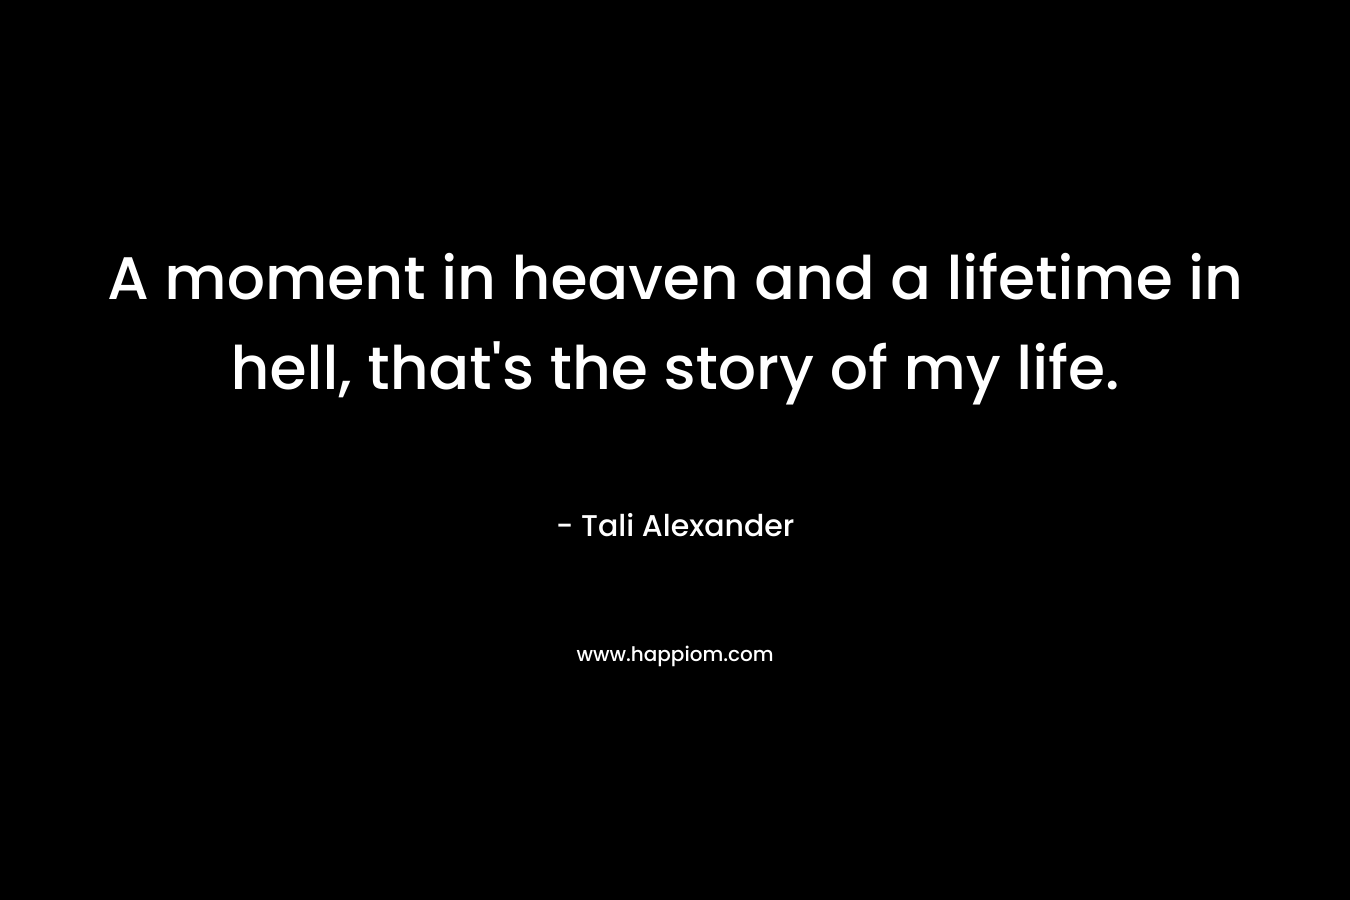 A moment in heaven and a lifetime in hell, that’s the story of my life. – Tali Alexander